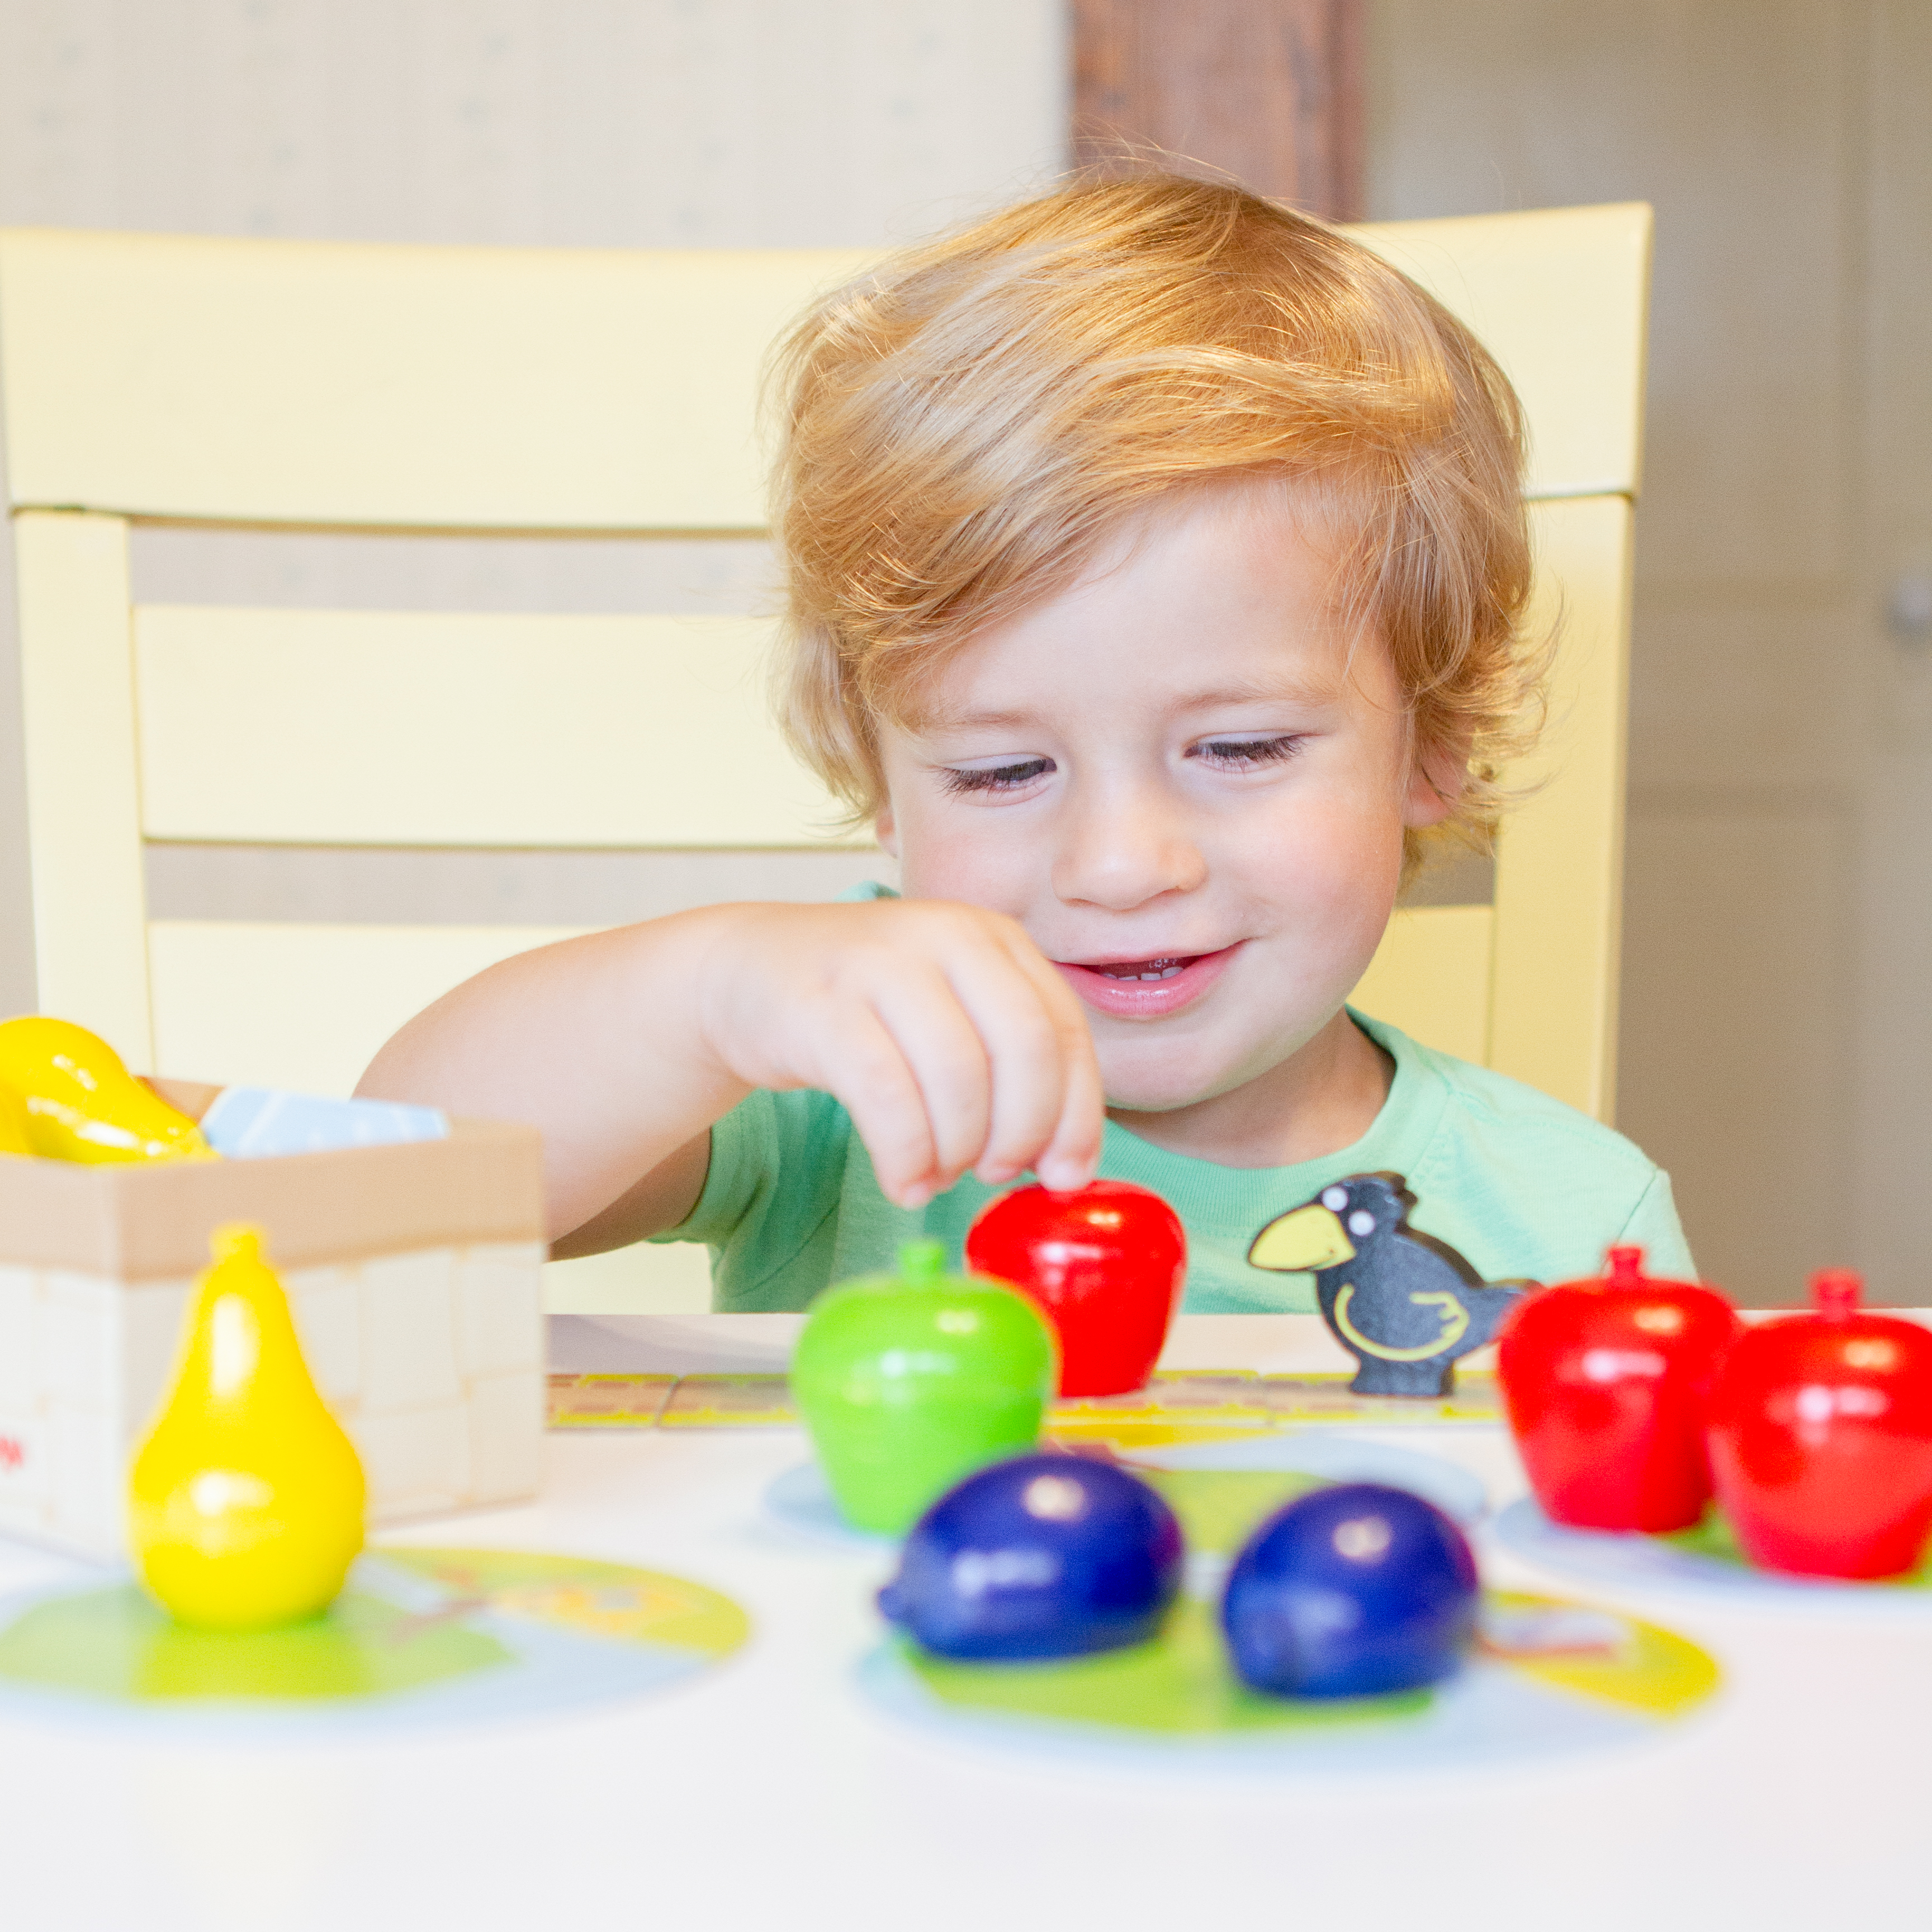 haba games for 3 year olds